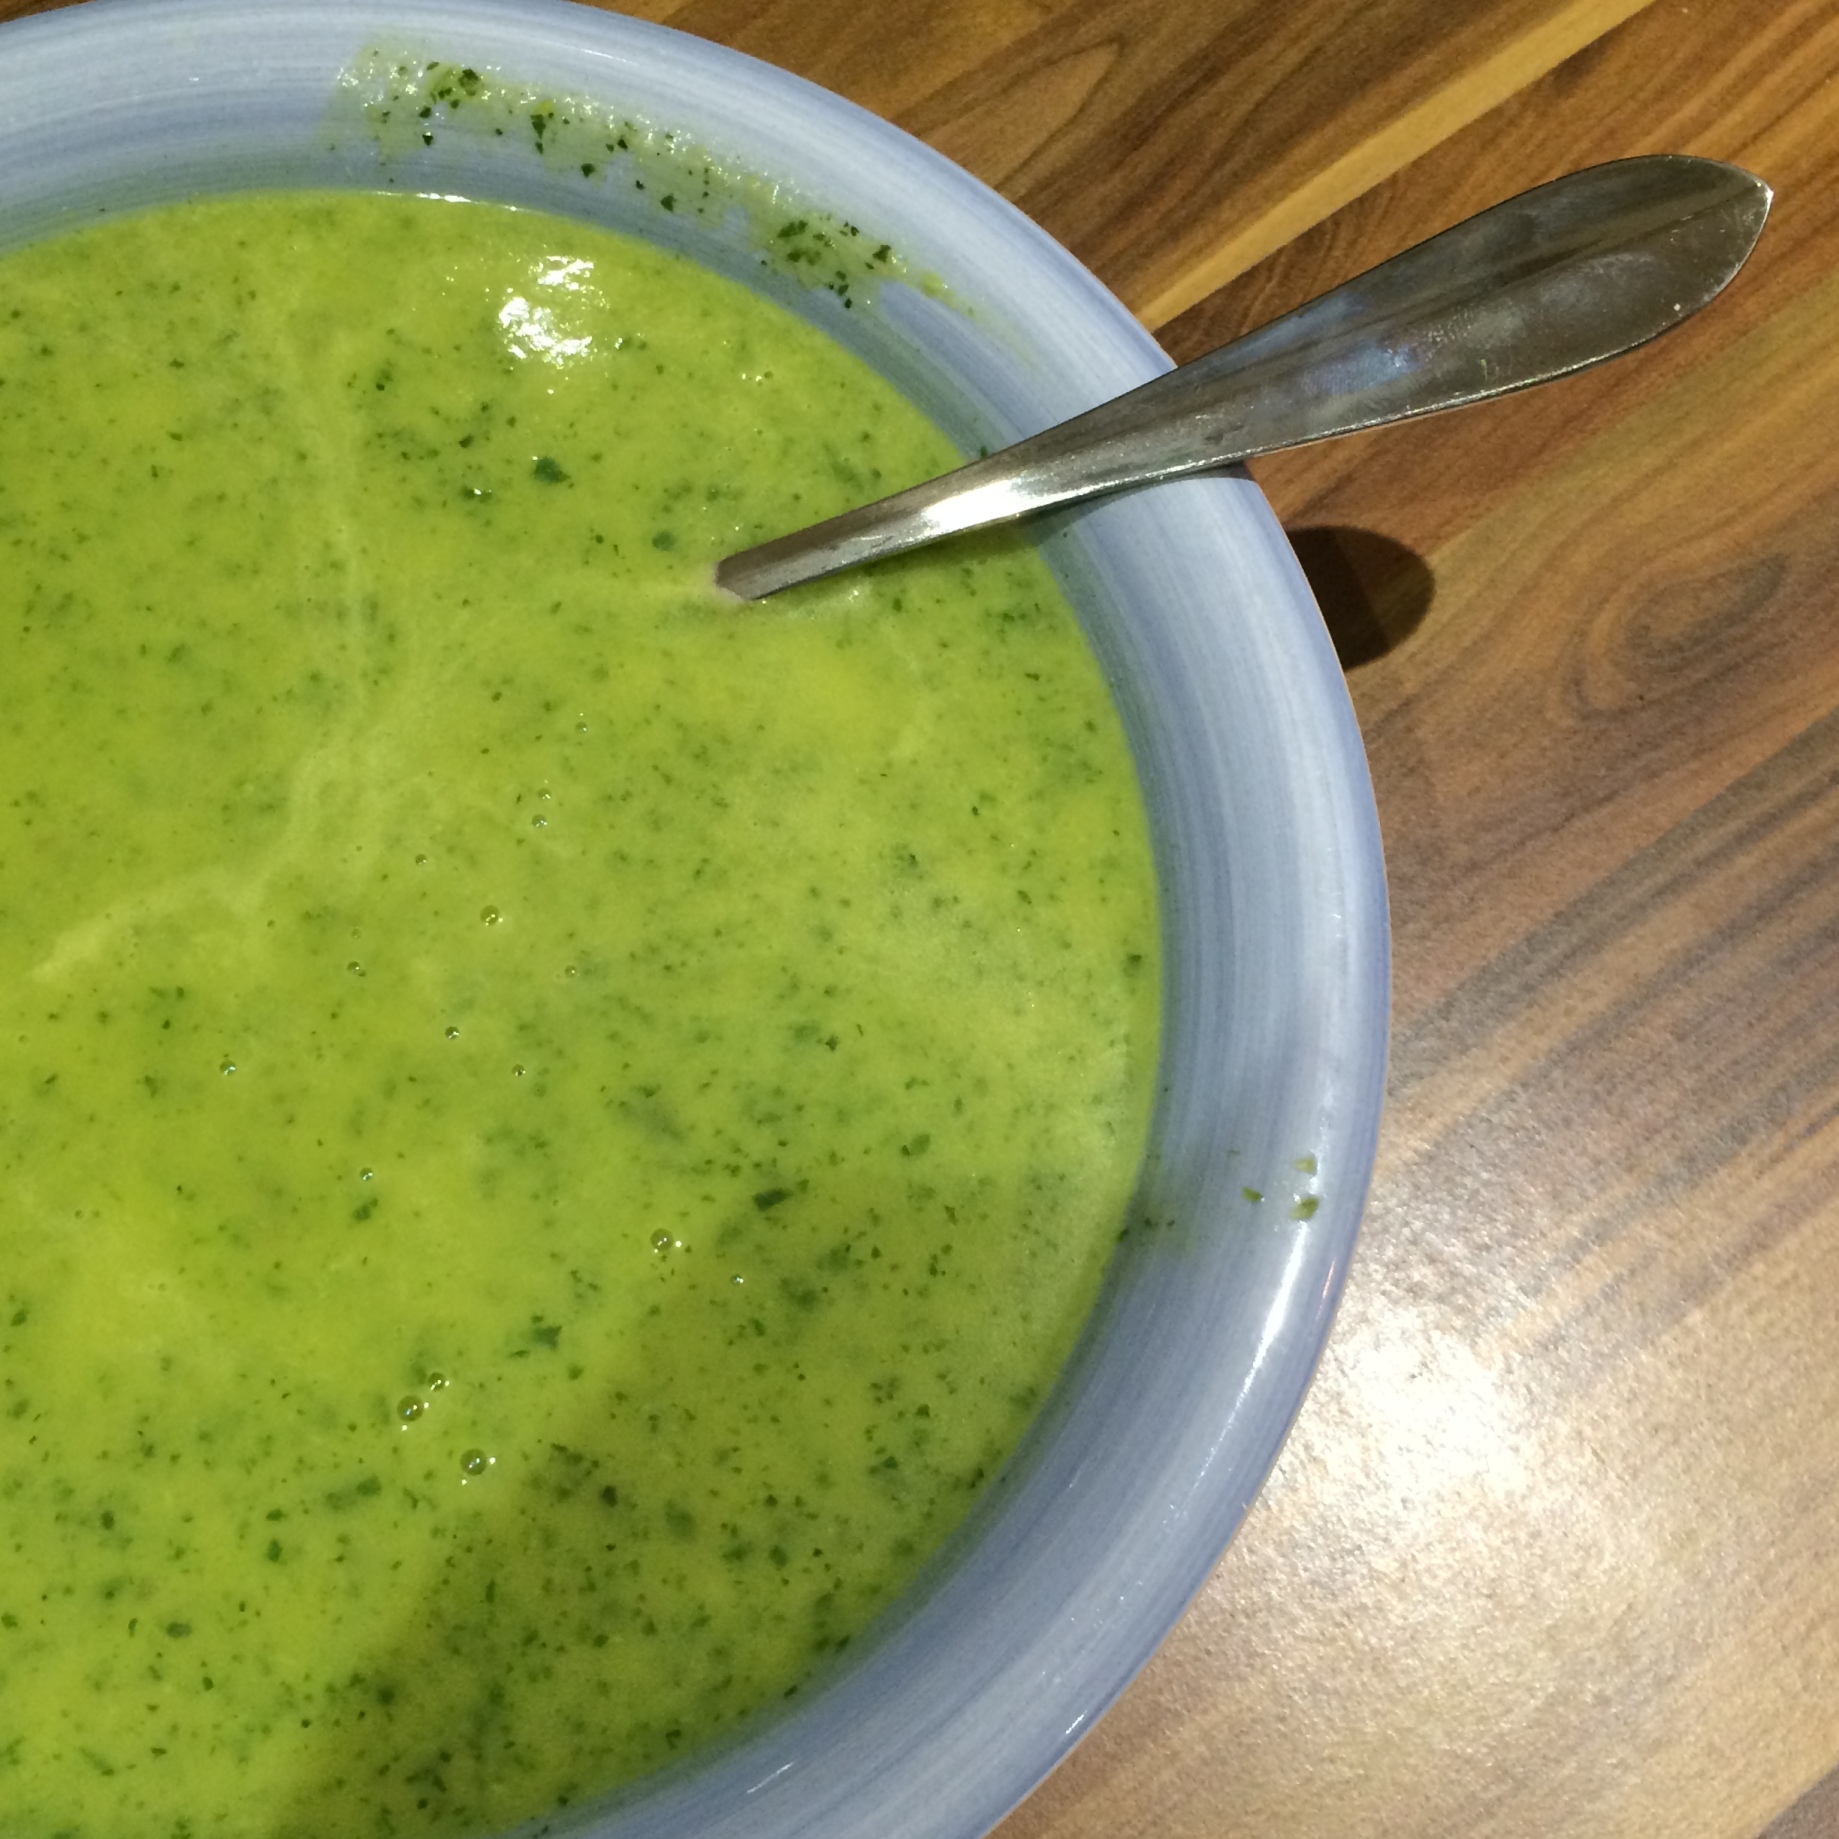 Courgette and watercress soup